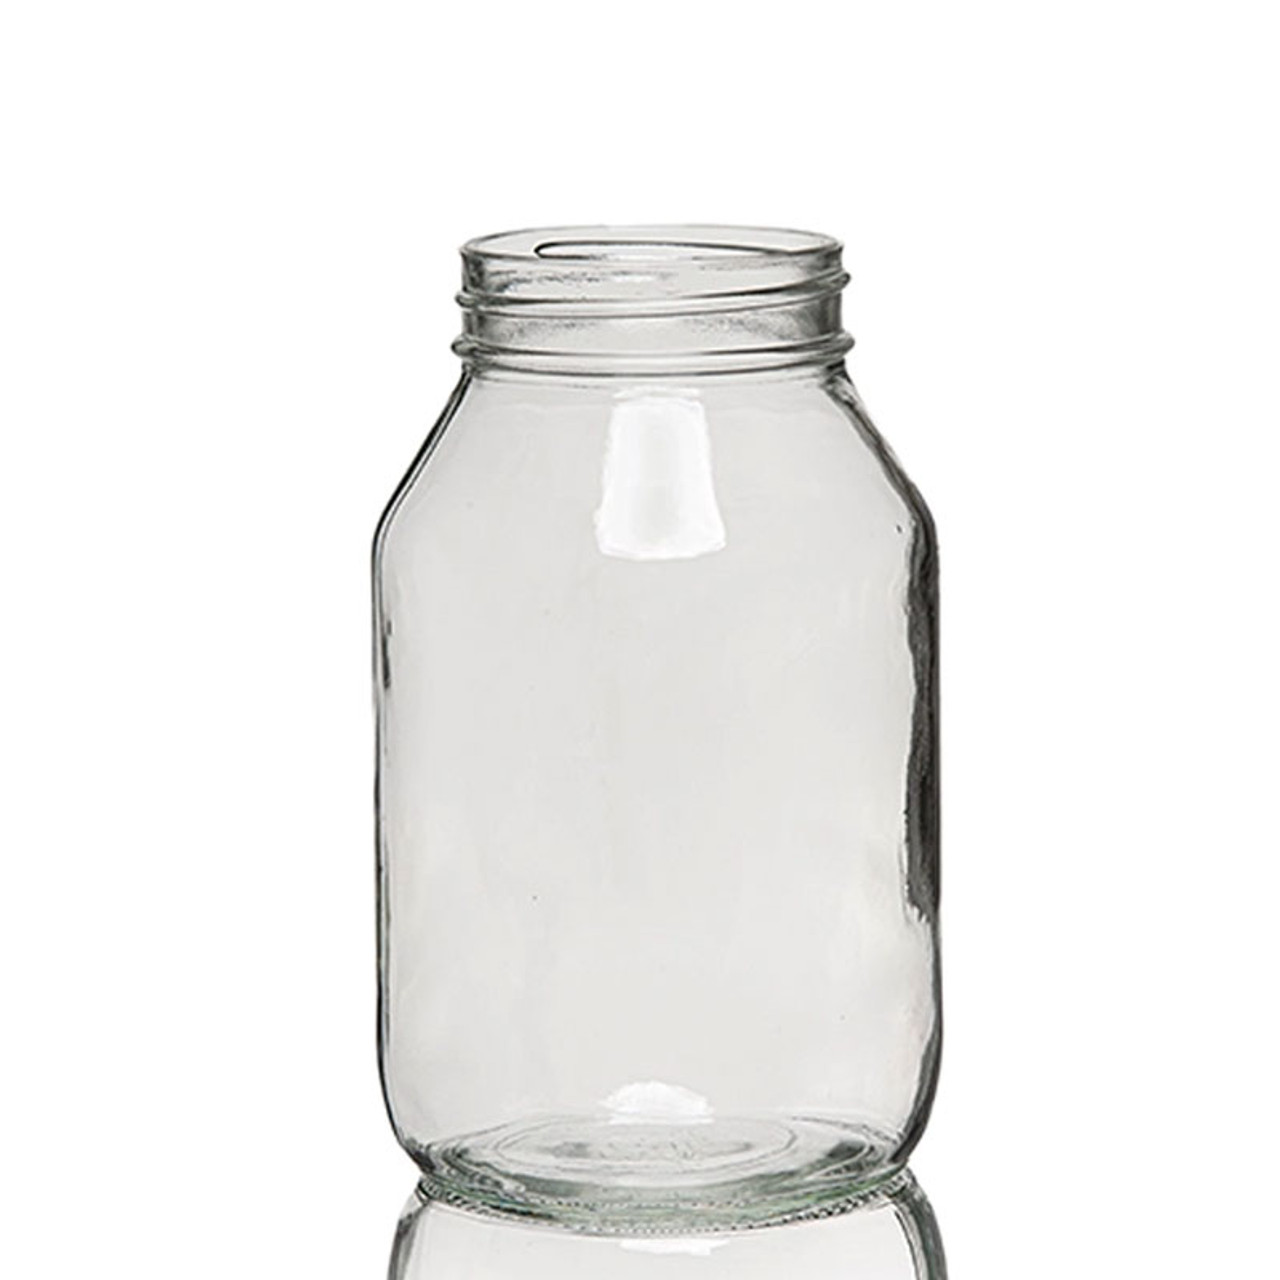 8oz Clear Glass General Purpose Jars for Canning 12/Case, Clear Type III 58 Lug